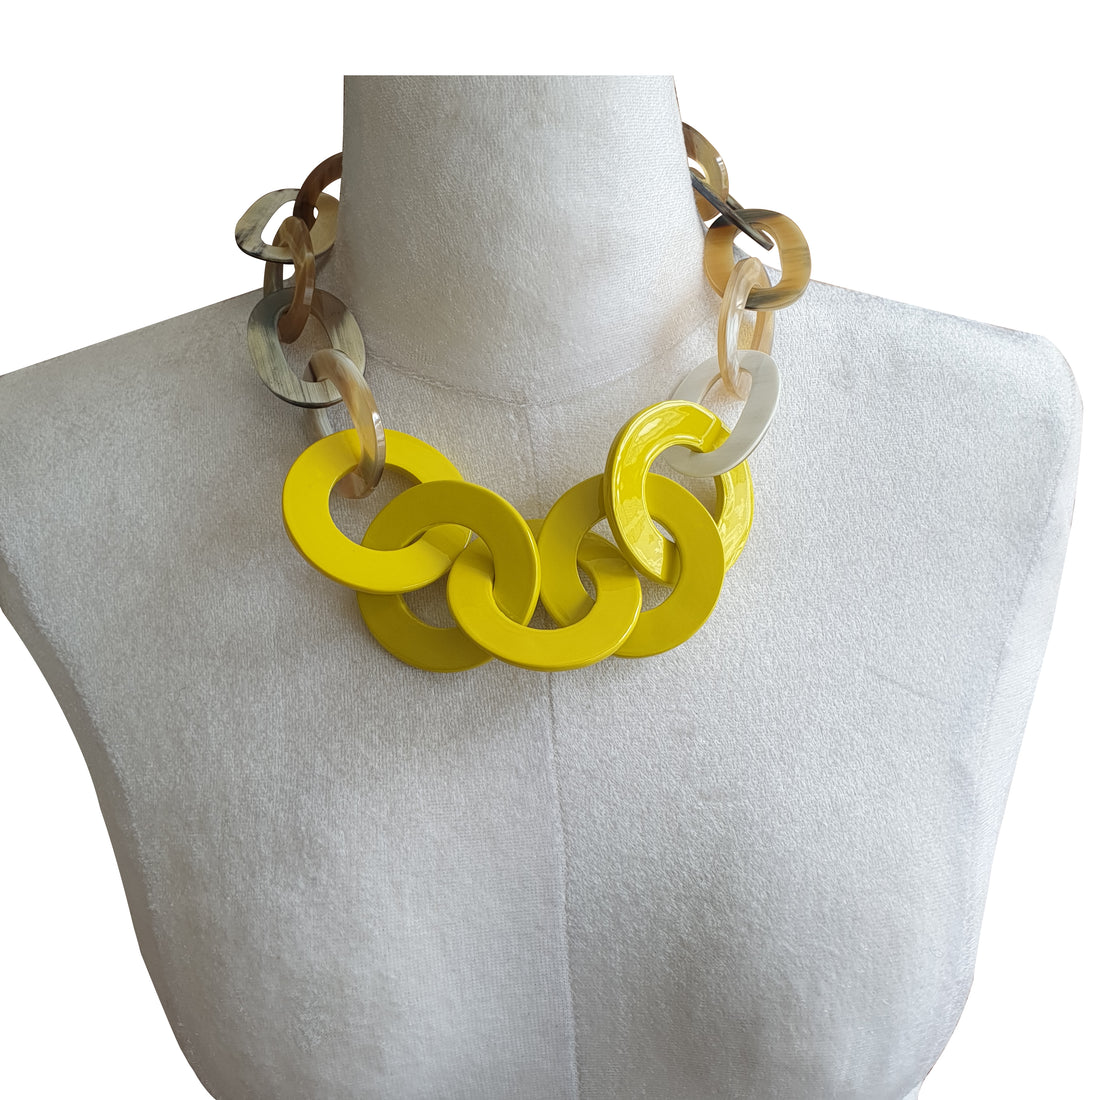 A wide chain necklace has central 5 yellow pendants that are worn by a mannequin in the natural light